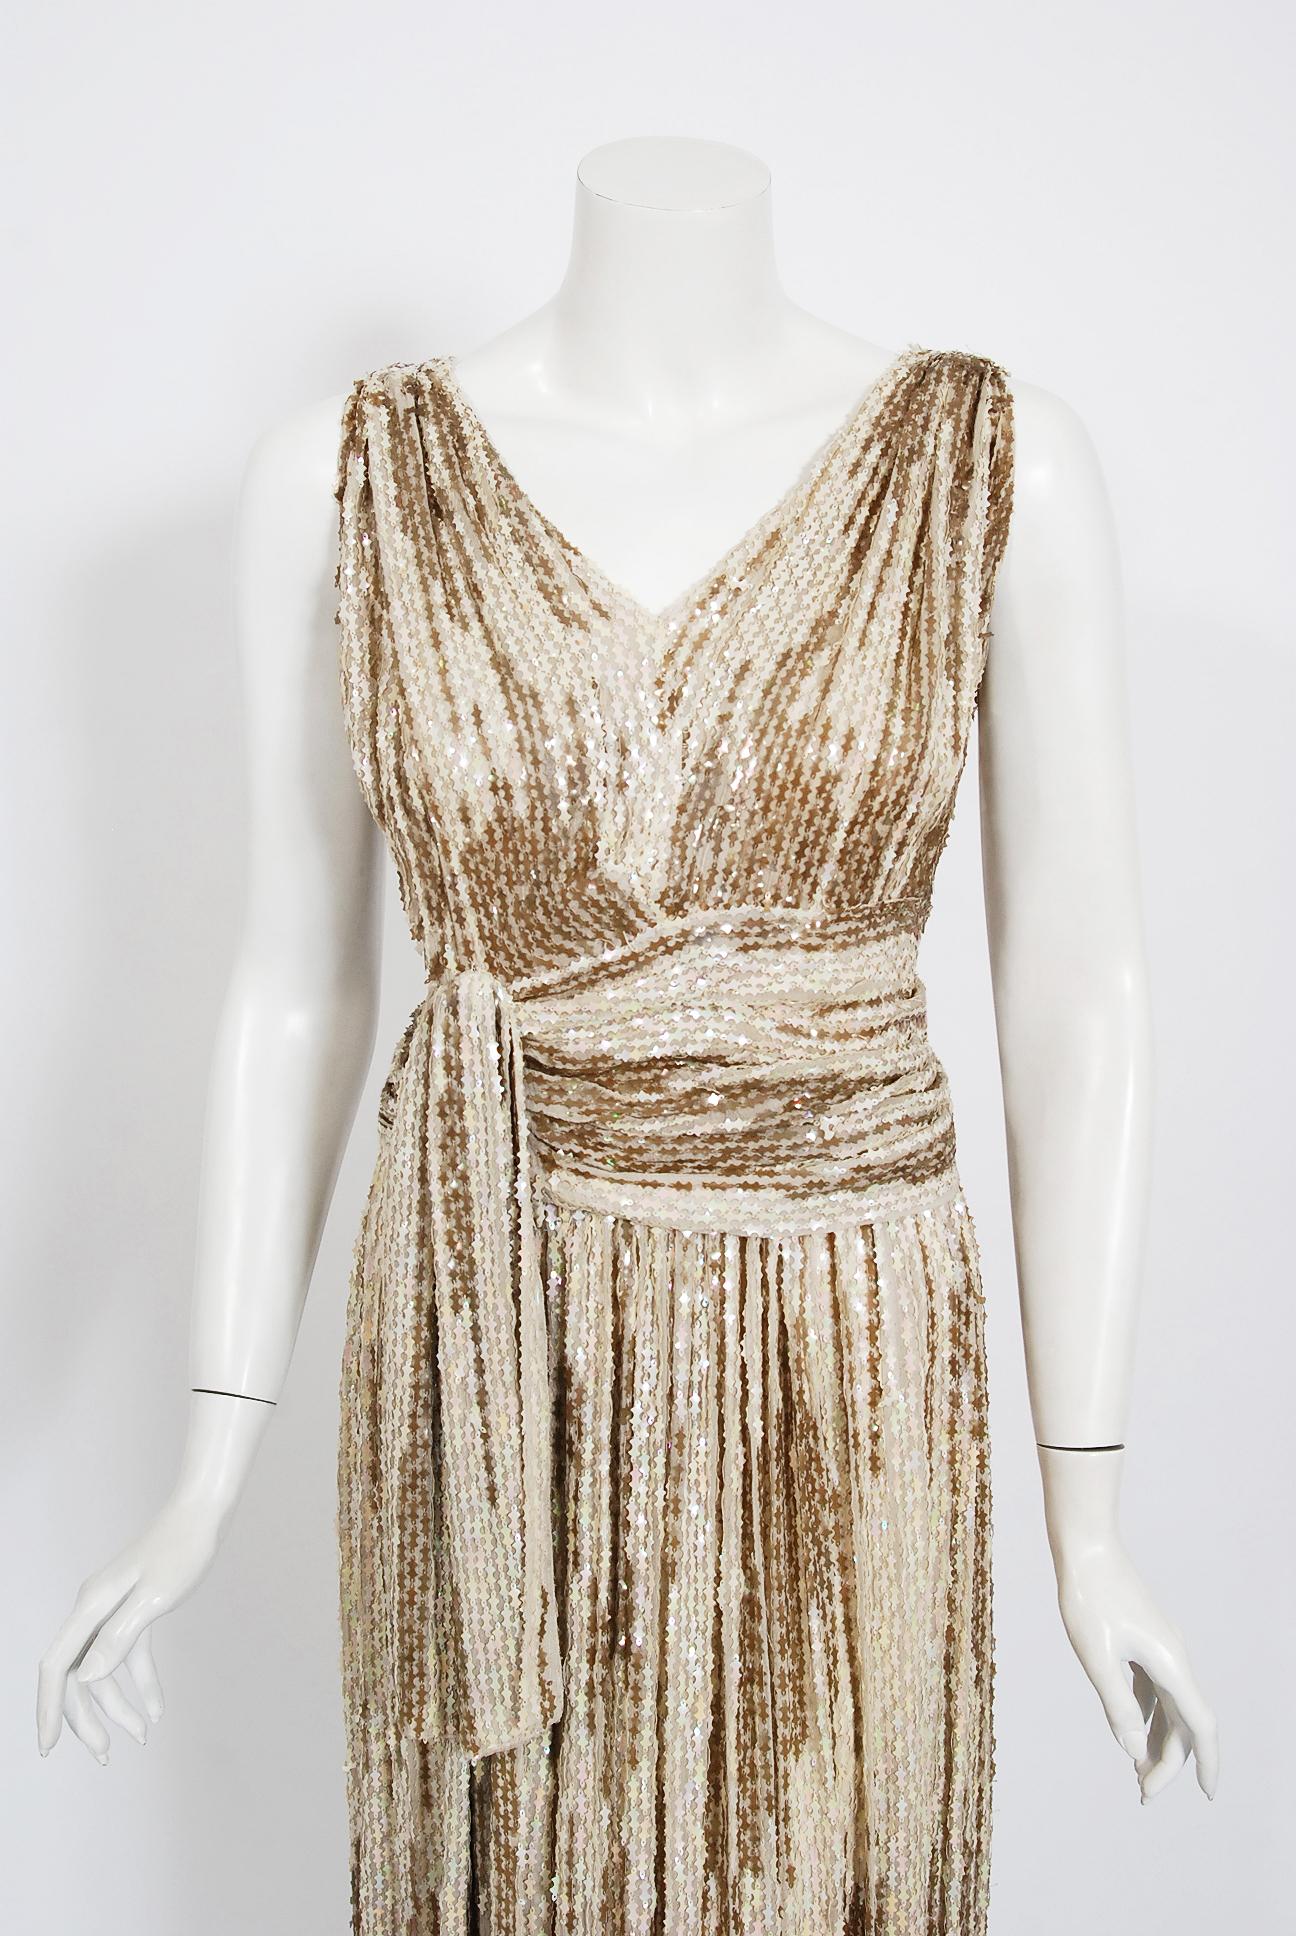 Sparkling gowns from the early 1940's era are perennial favorites and this French couture showstopper is breathtaking. The garment's simple fluid structure is so modern; the fine fantaisie paillettes sequins are a treasure trove of needle art. I